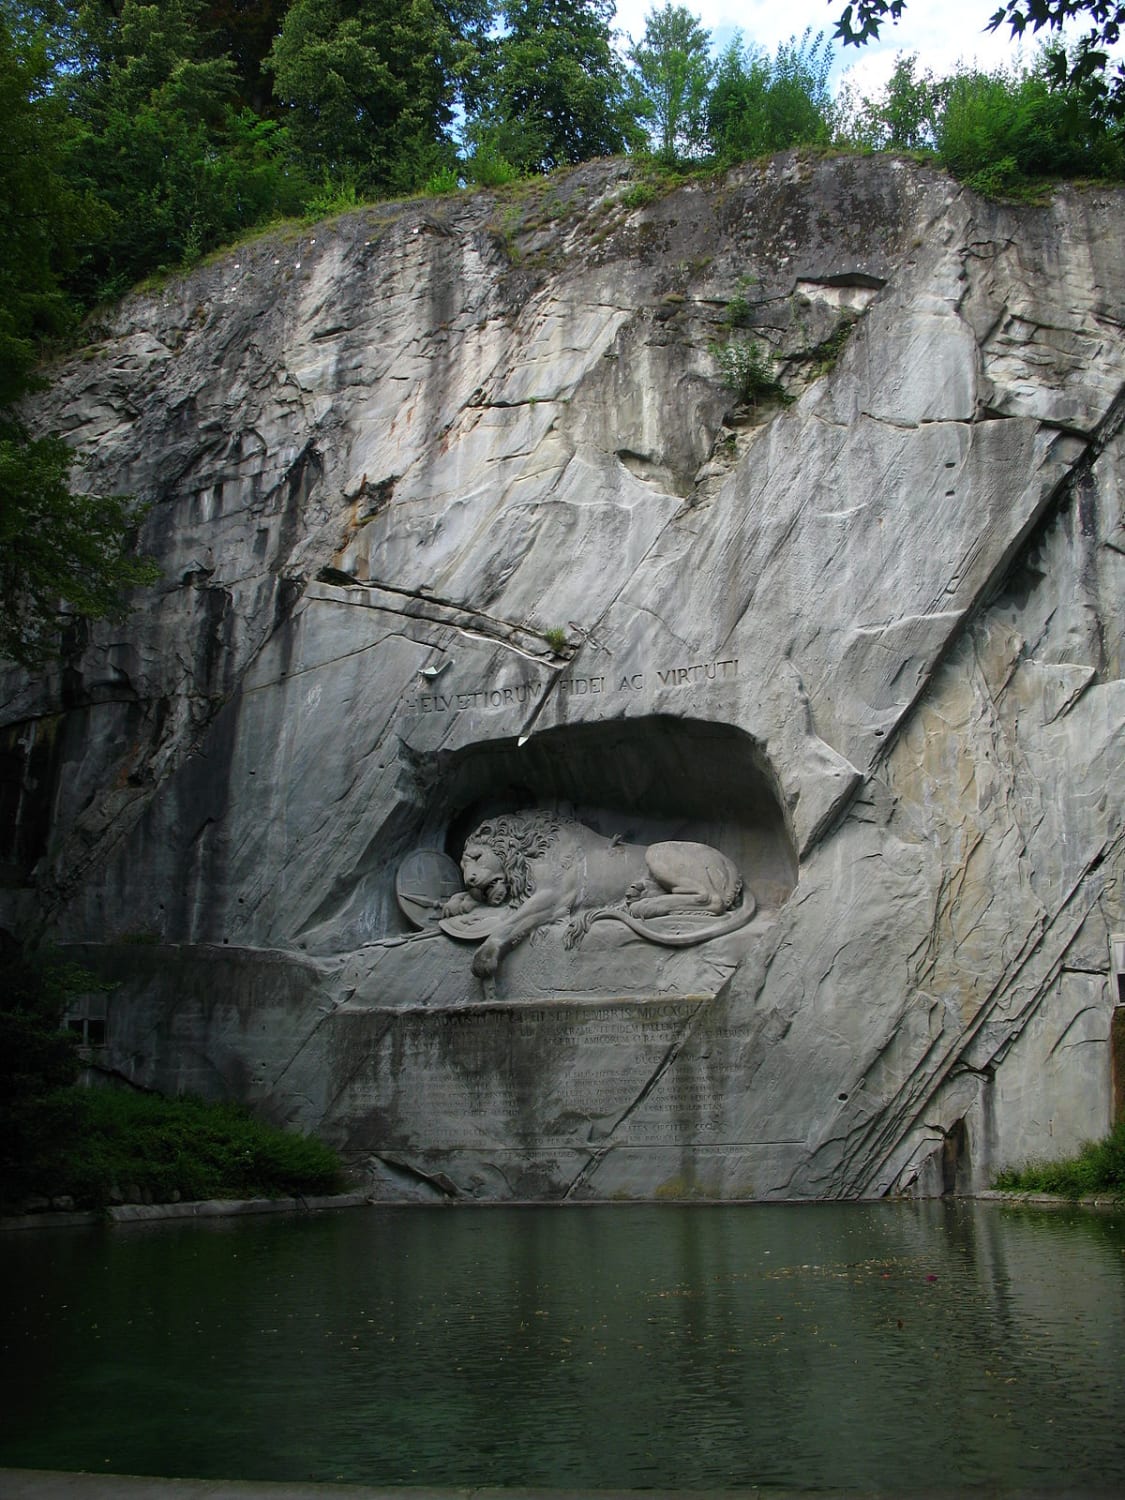 The Lion of Lucerne is a rock relief in Lucerne Switzerland designed by Bertel Thorvaldsen and hewn in 1820-21 by Lukas Ahorn